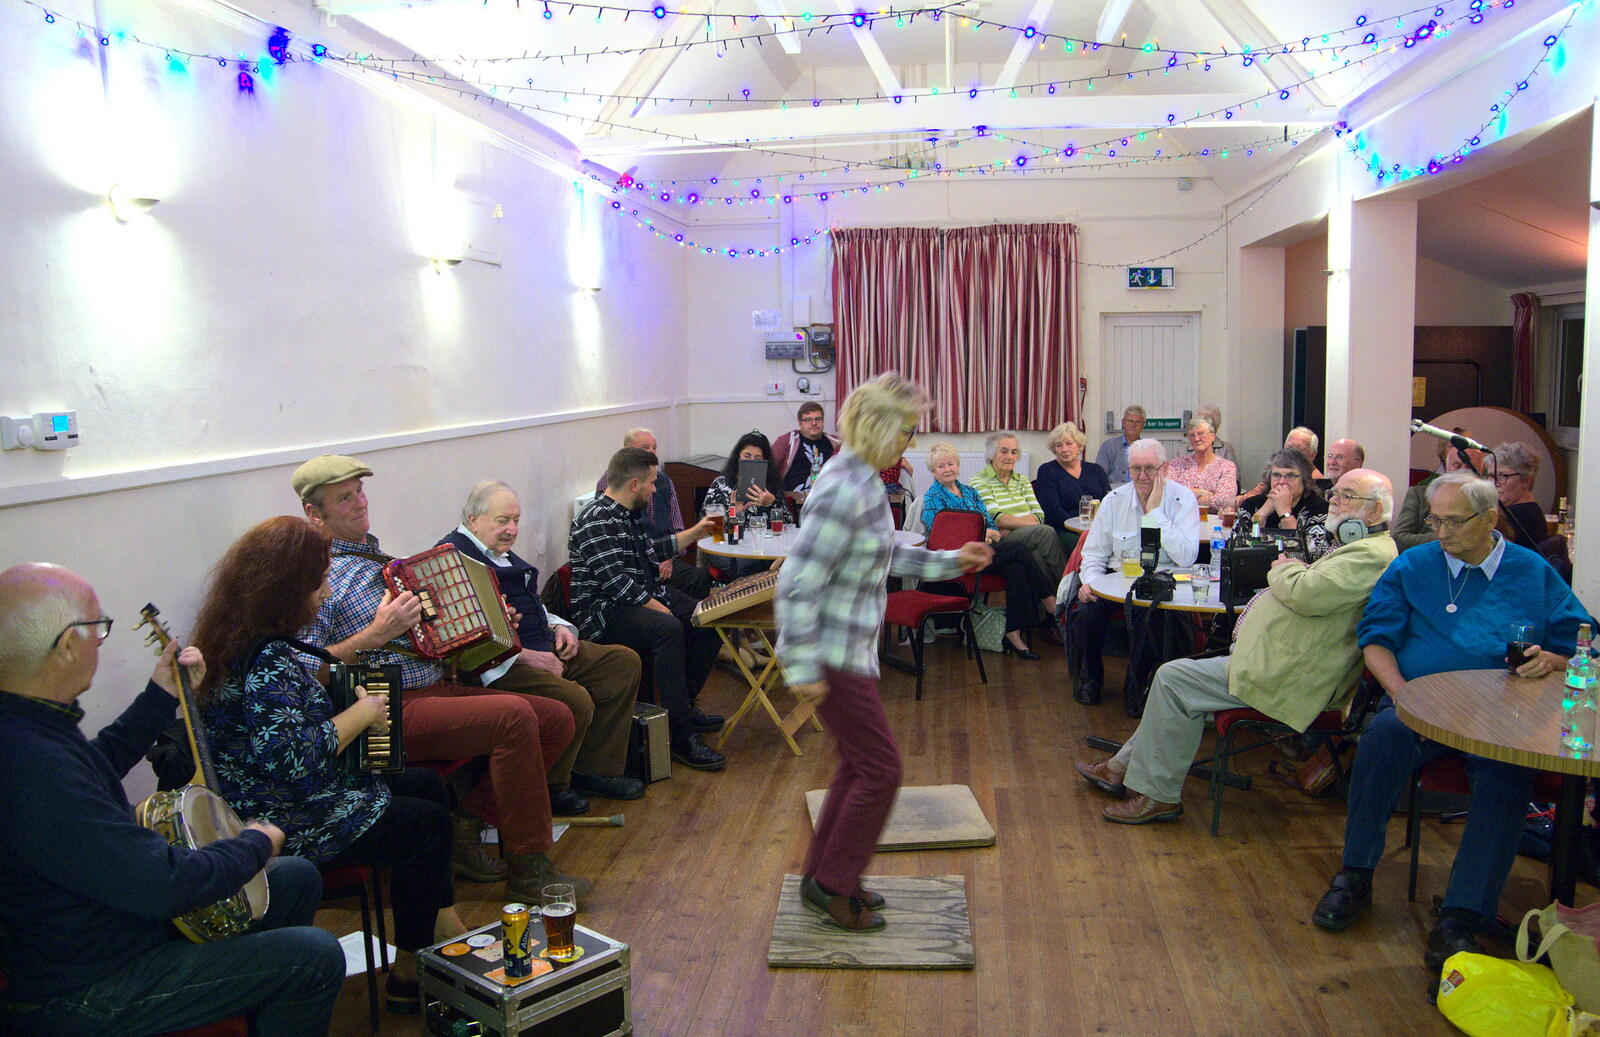 A view of step dancing from Big Steve's Music Night, The Village Hall, Brome, Suffolk - 6th October 2018